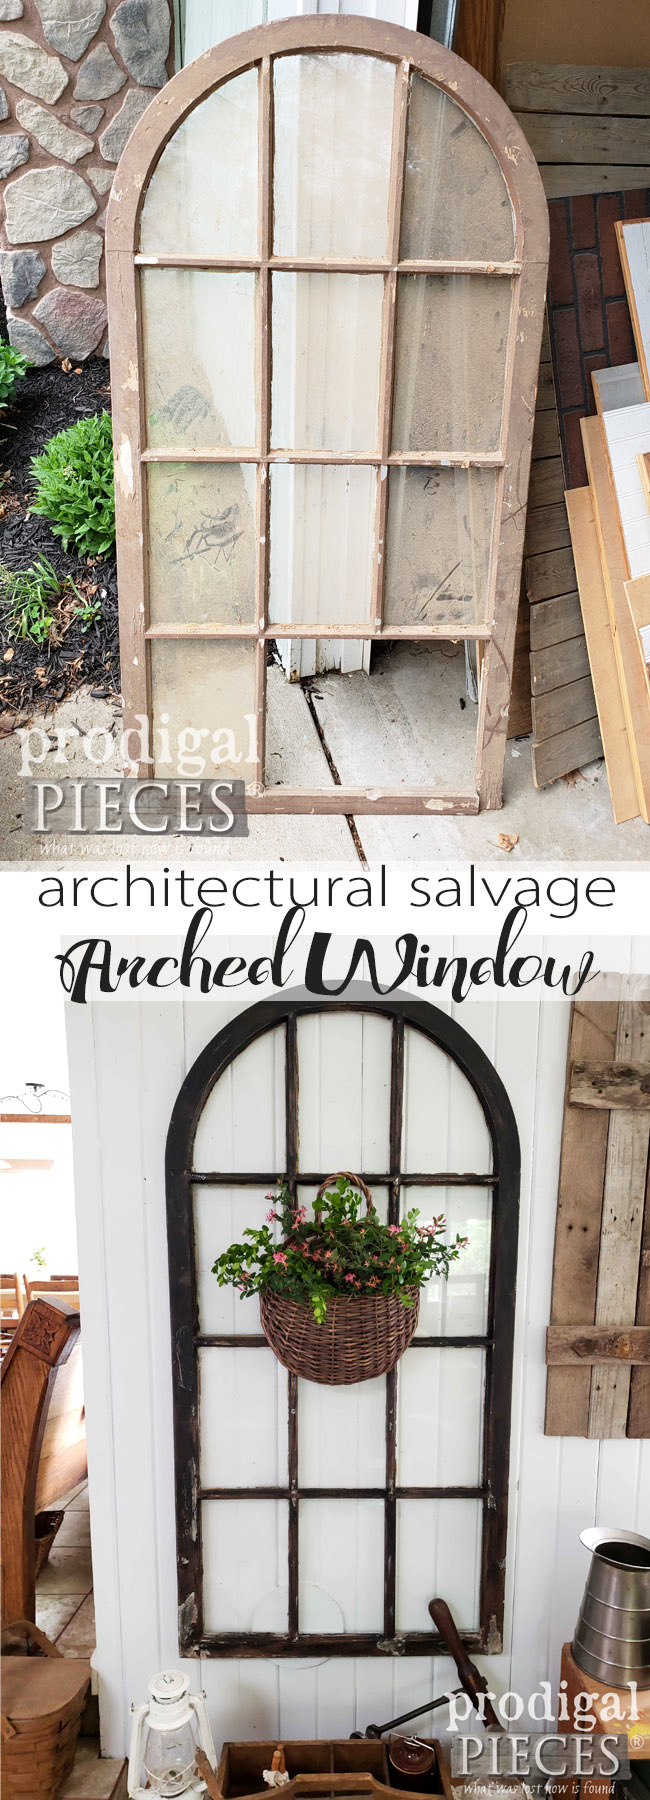 From a curbside find to perfect architectural salvage decor, this arched window is made new. Perfect of farmhouse style decor by Larissa of Prodigal Pieces | prodigalpieces.com #prodigalpieces #homedecor #diy #farmhouse